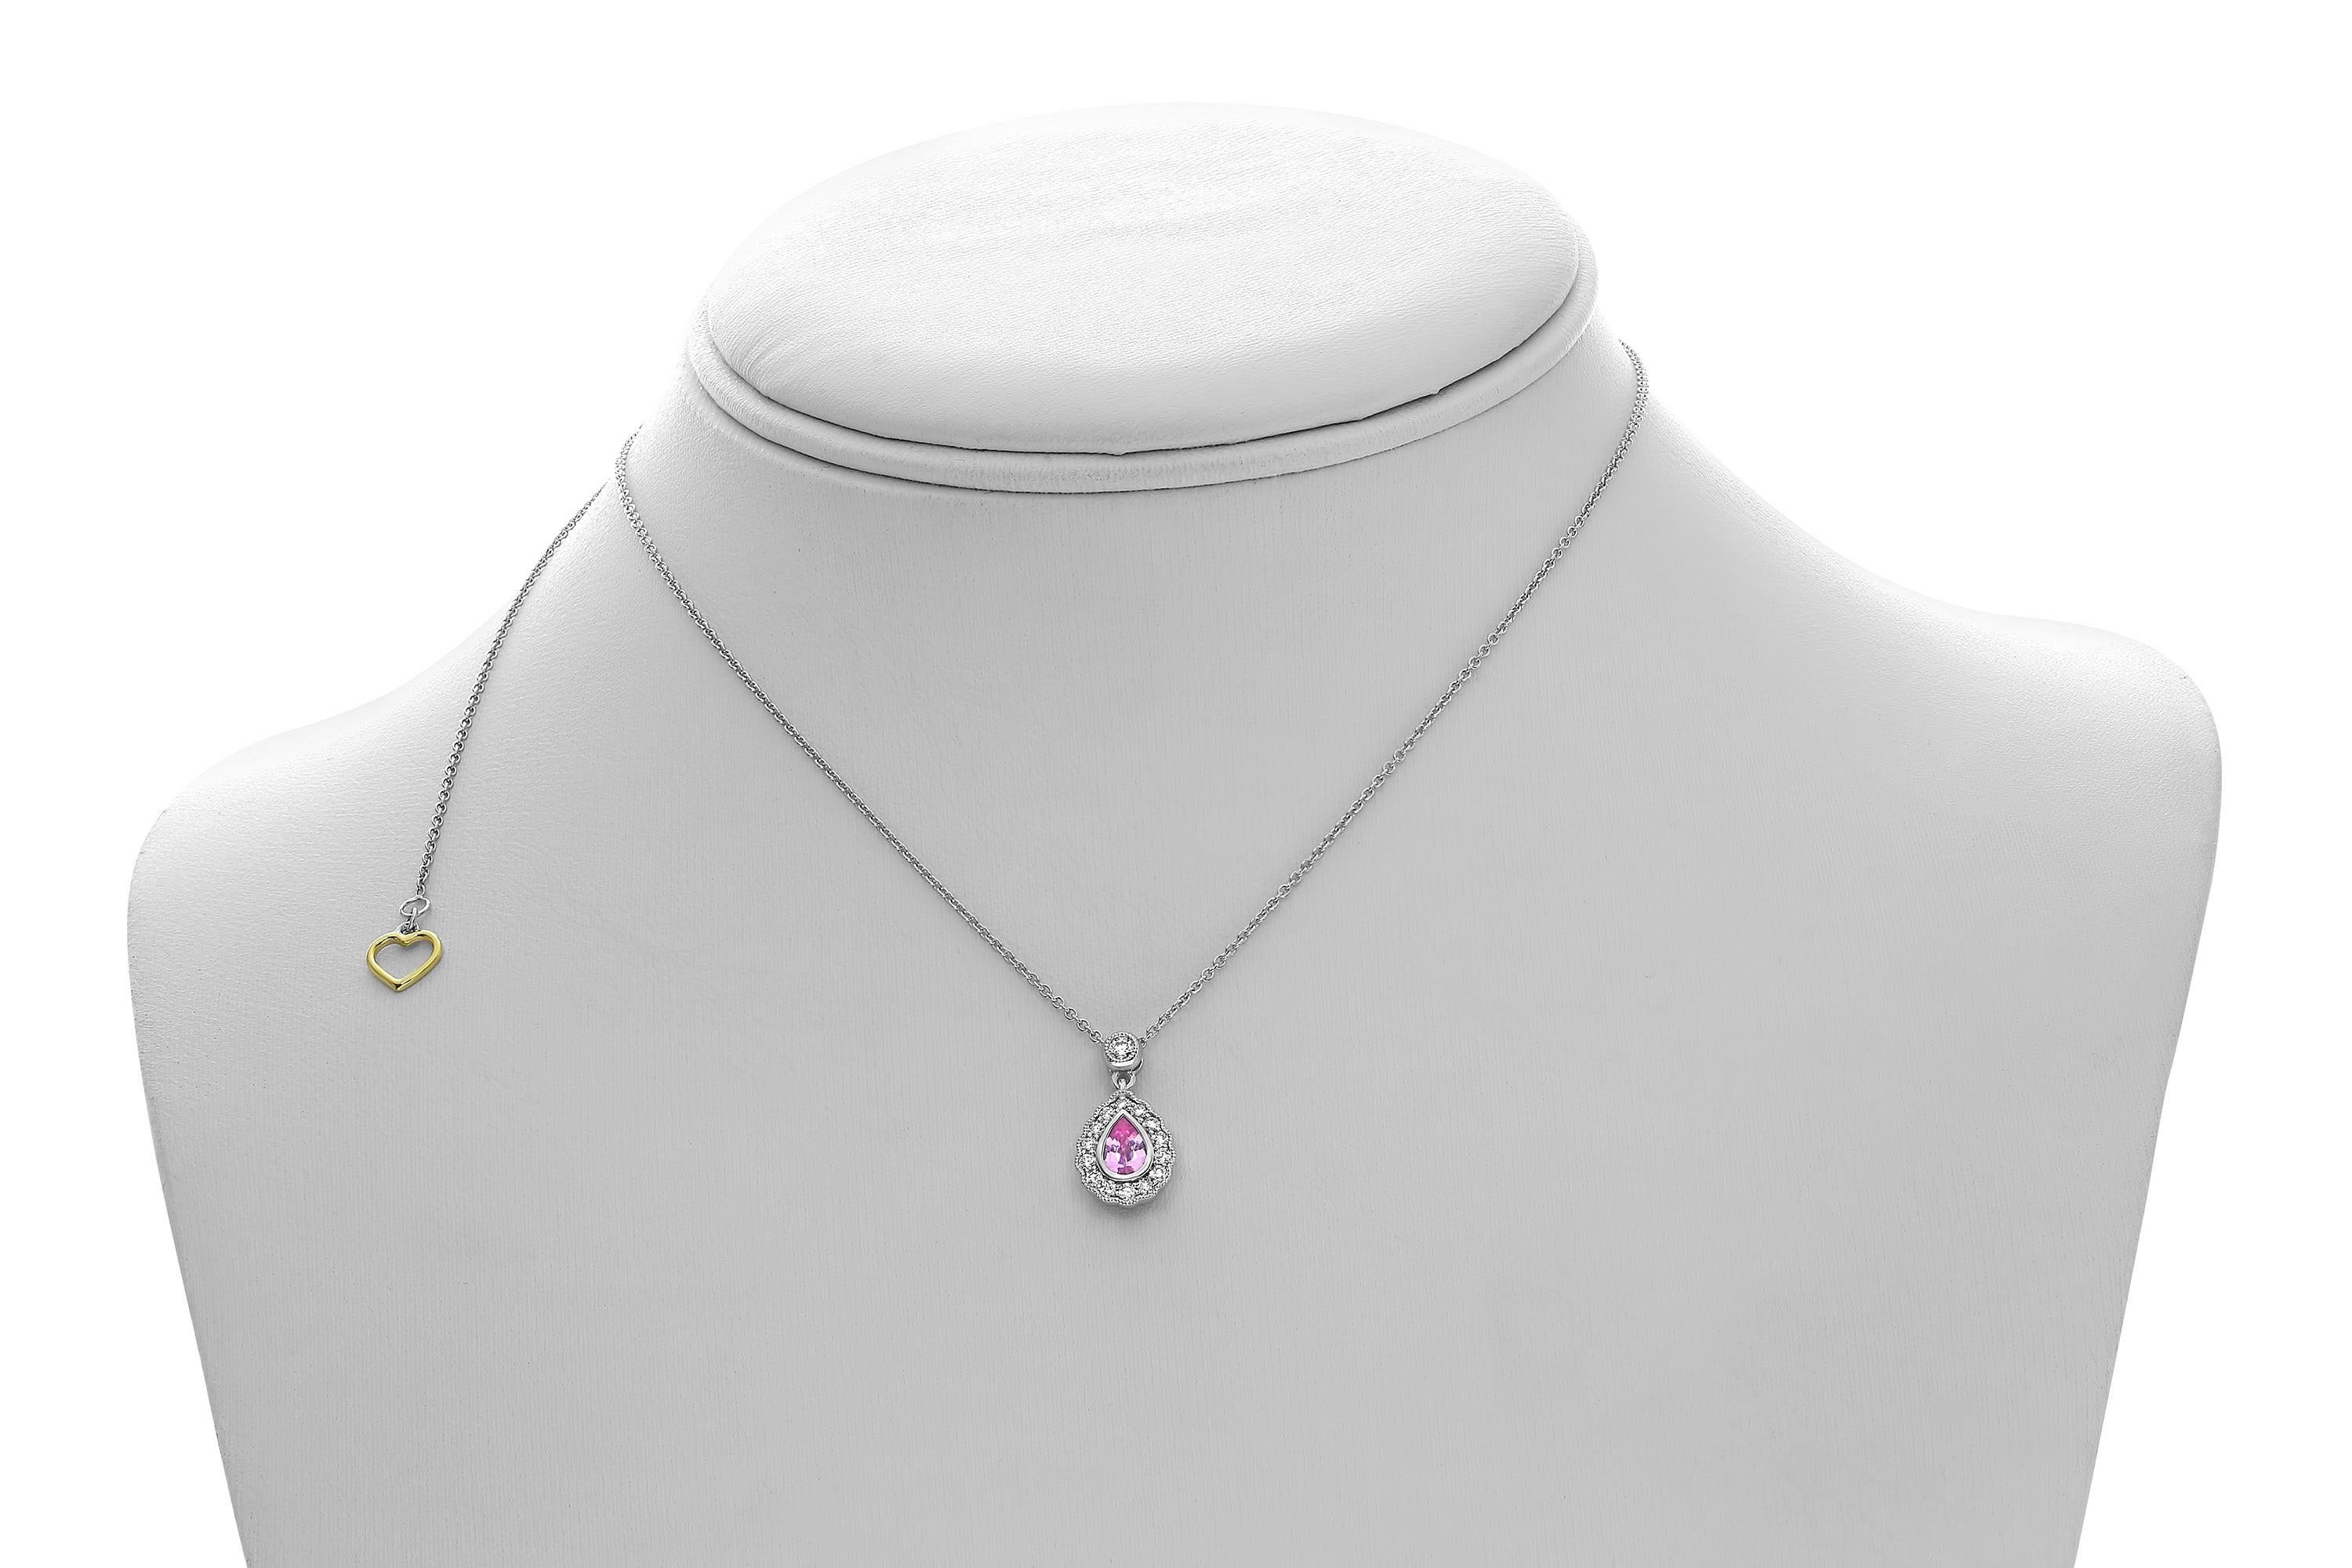 This 18 karat white gold necklace showcases a 0.47 carat, pear-shaped pink sapphire accented by 0.25 carats of round cut white diamonds showcased in a stunning single halo ornamented by intricate milgrain detailing. 

The center stone is eye clean